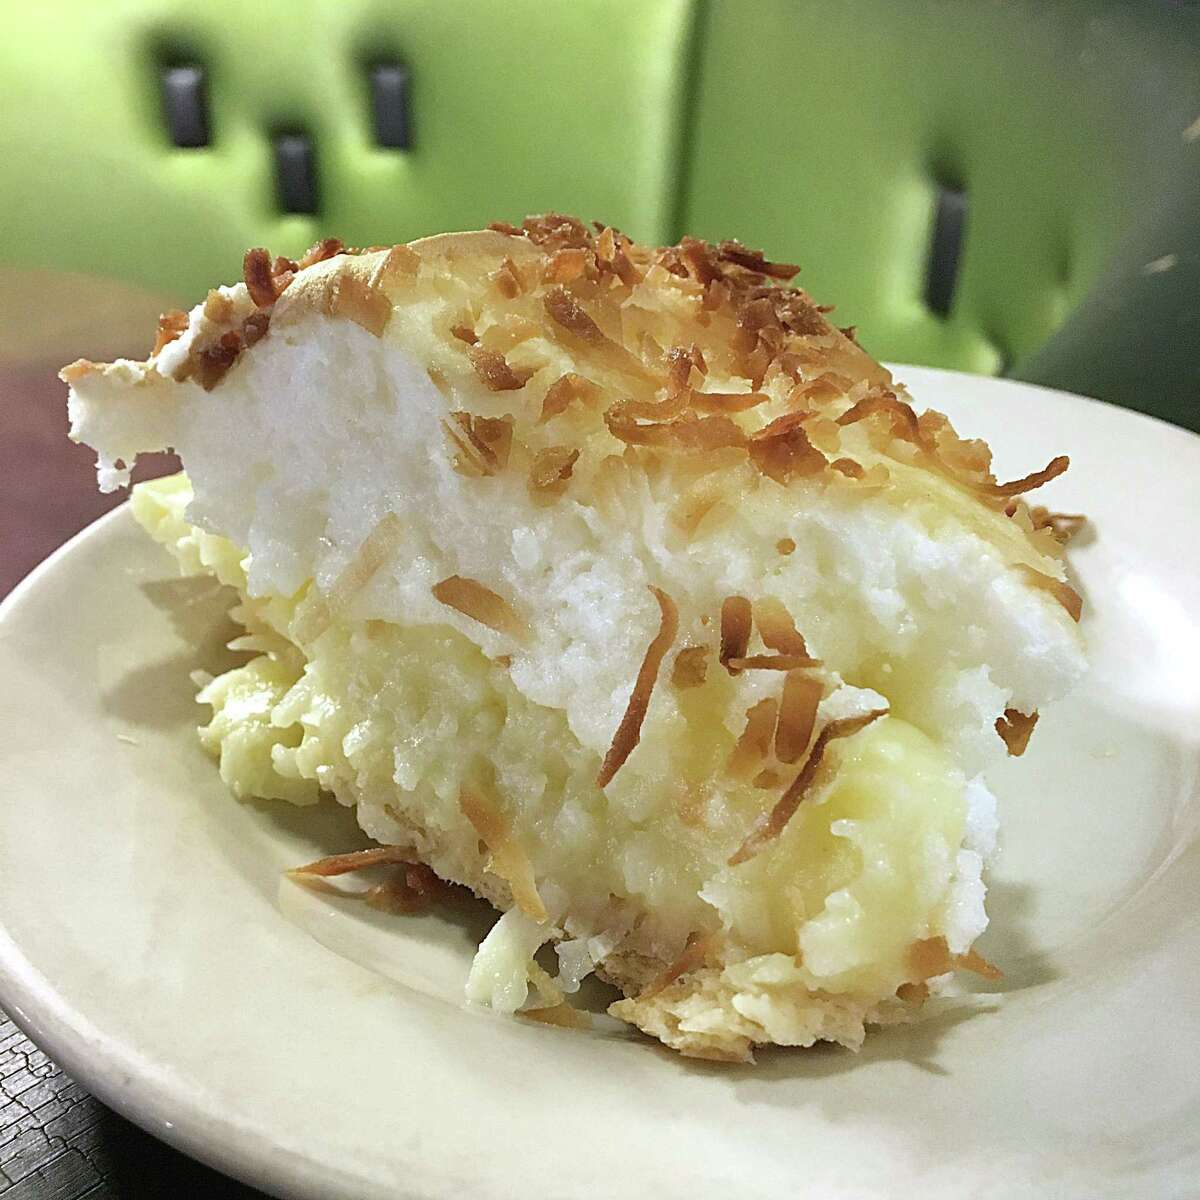 Coconut cream pie from Earl Abel's, one of the menu standards that will survive the move to Broadway.